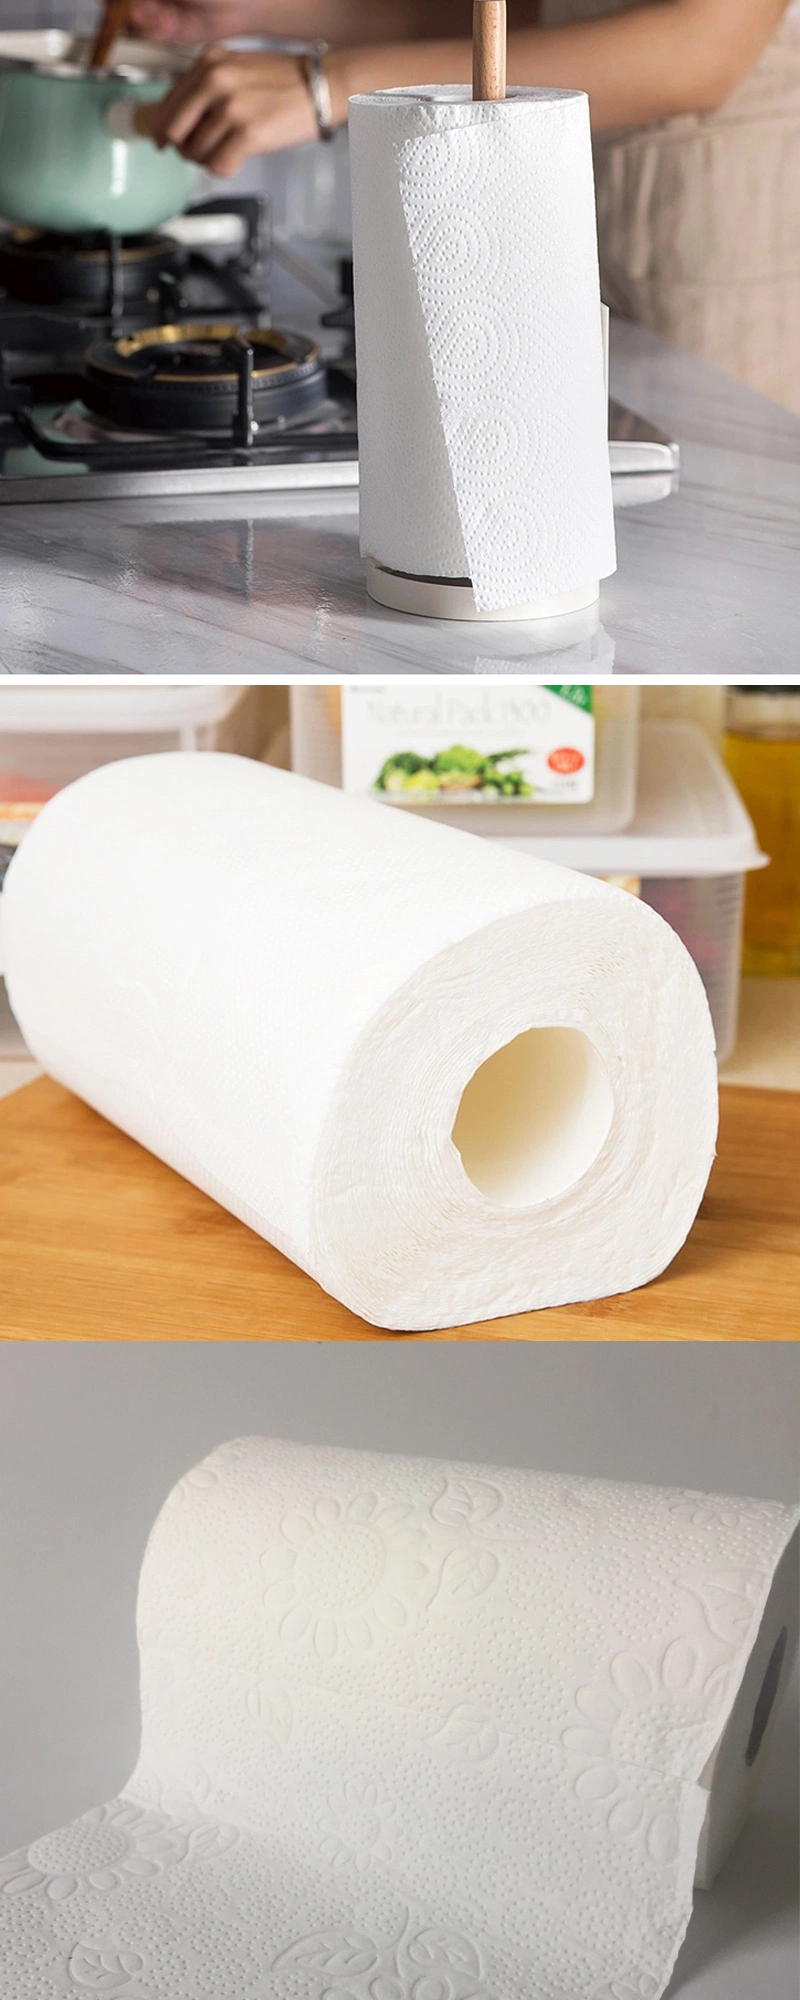 Chinese Suppliers Kitchen Hand Paper Towel, Tissue Paper